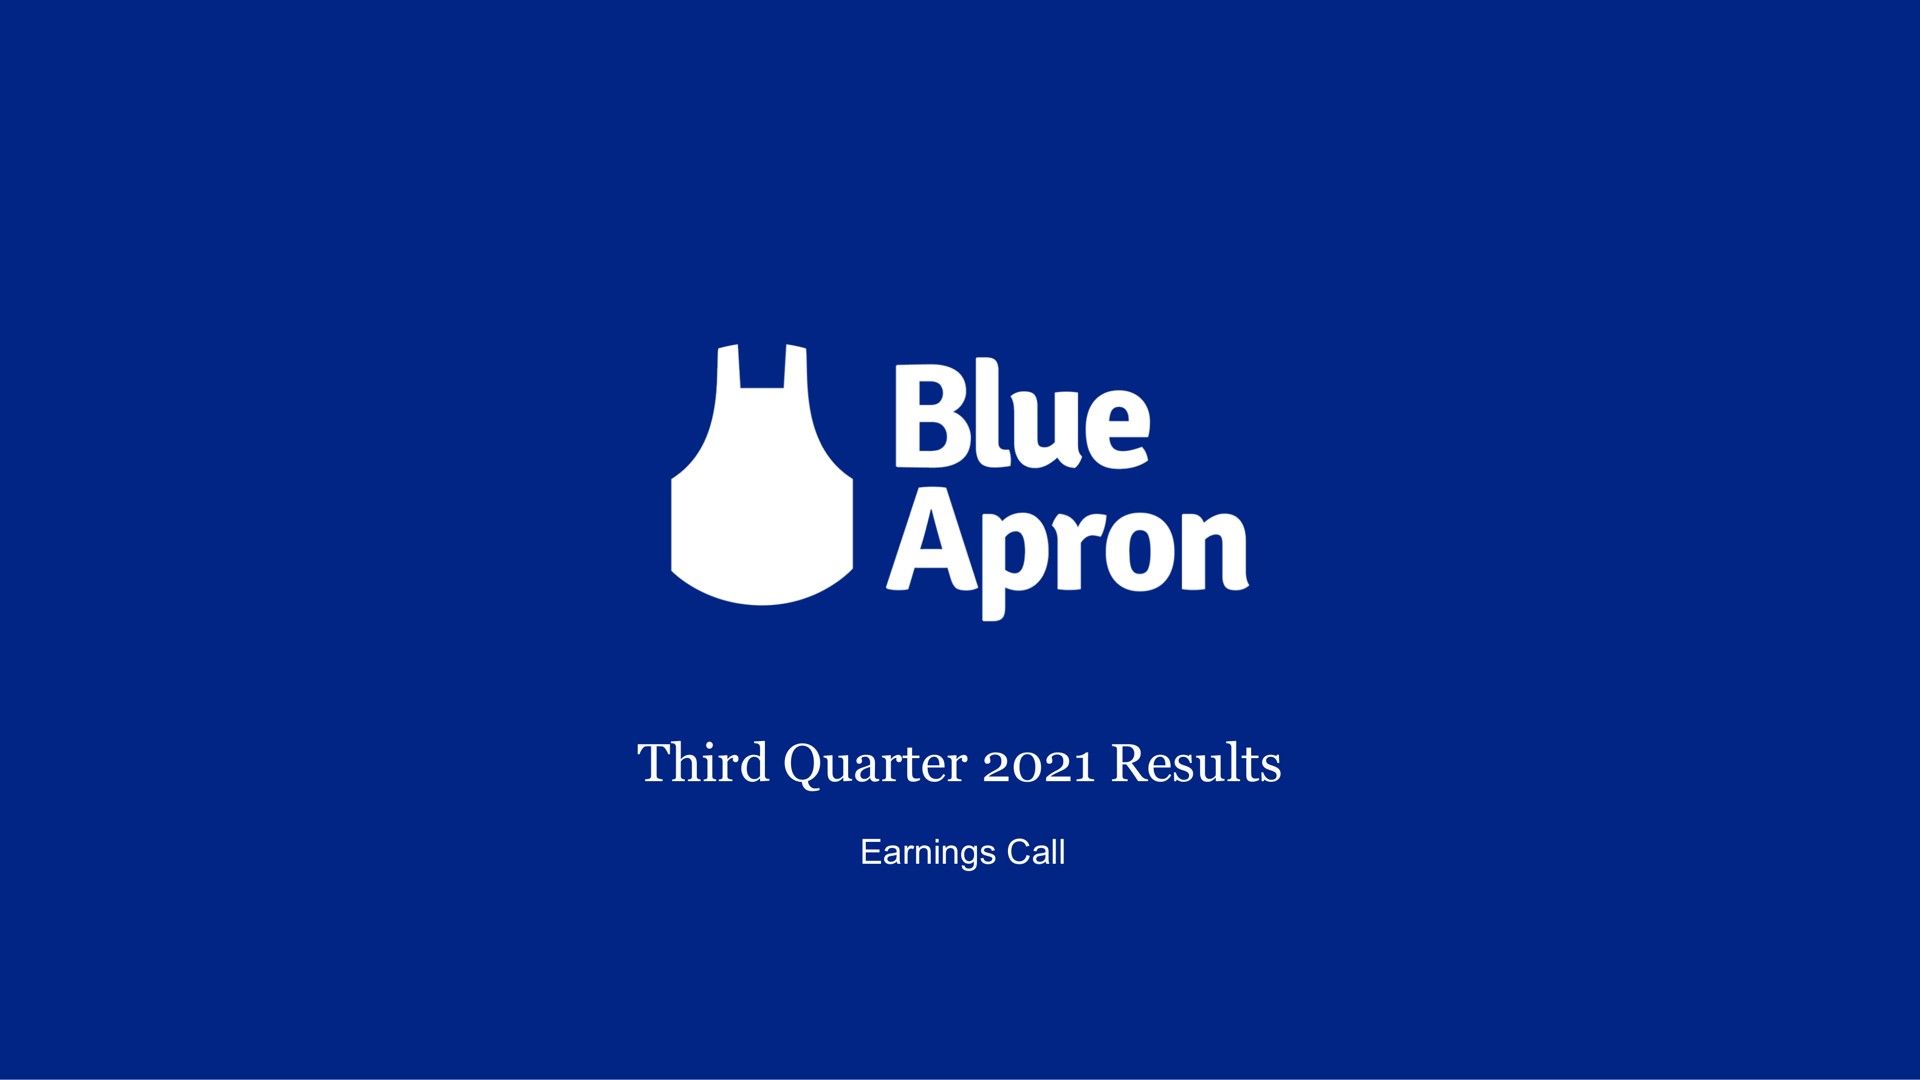 third quarter results earnings call blue apron | Blue Apron